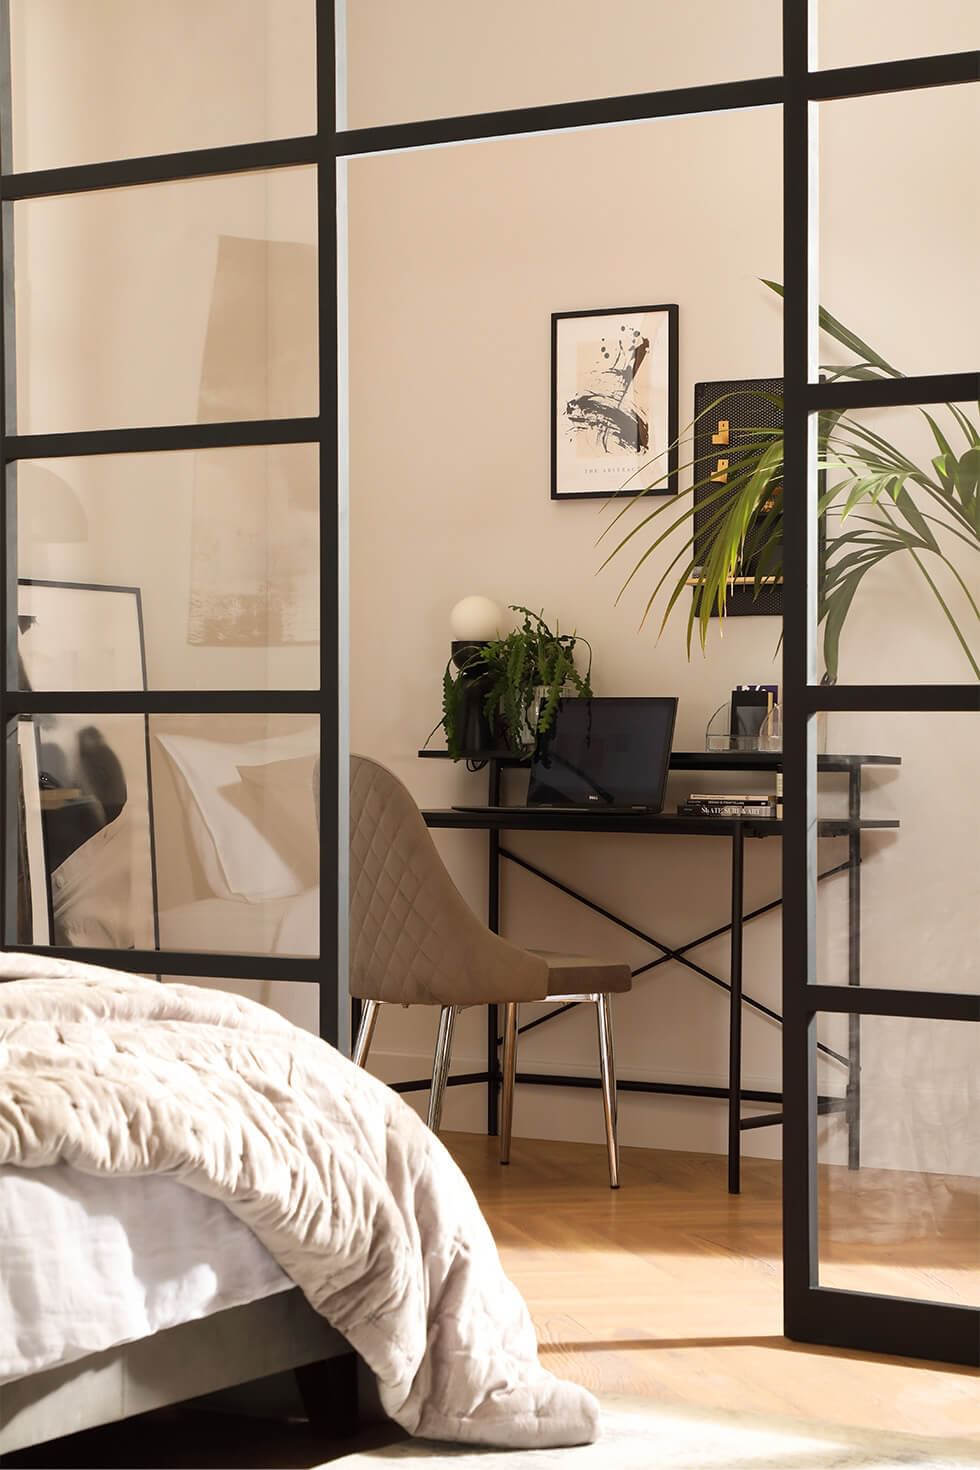 A home office in a contemporary bedroom with glass partitions as a room divider